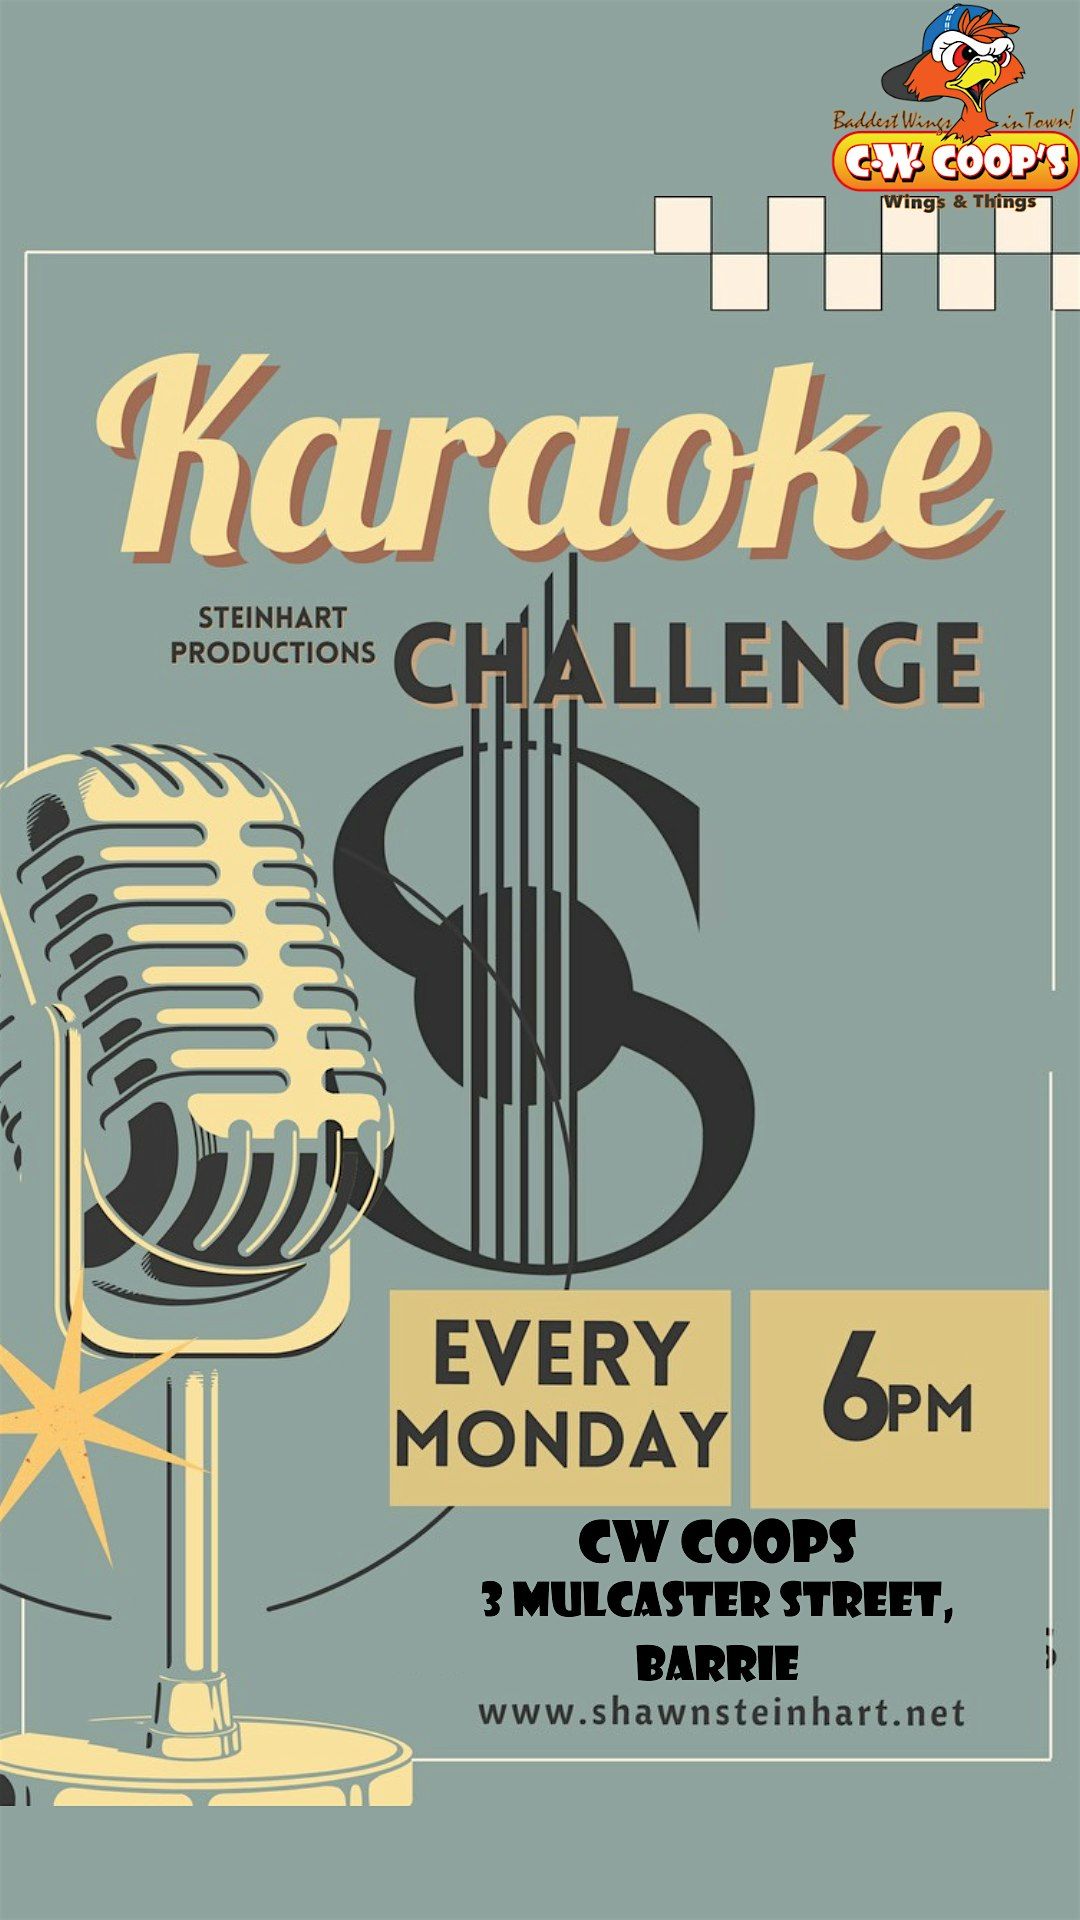 Karaoke Challenge at CW Coops - Win Prizes!